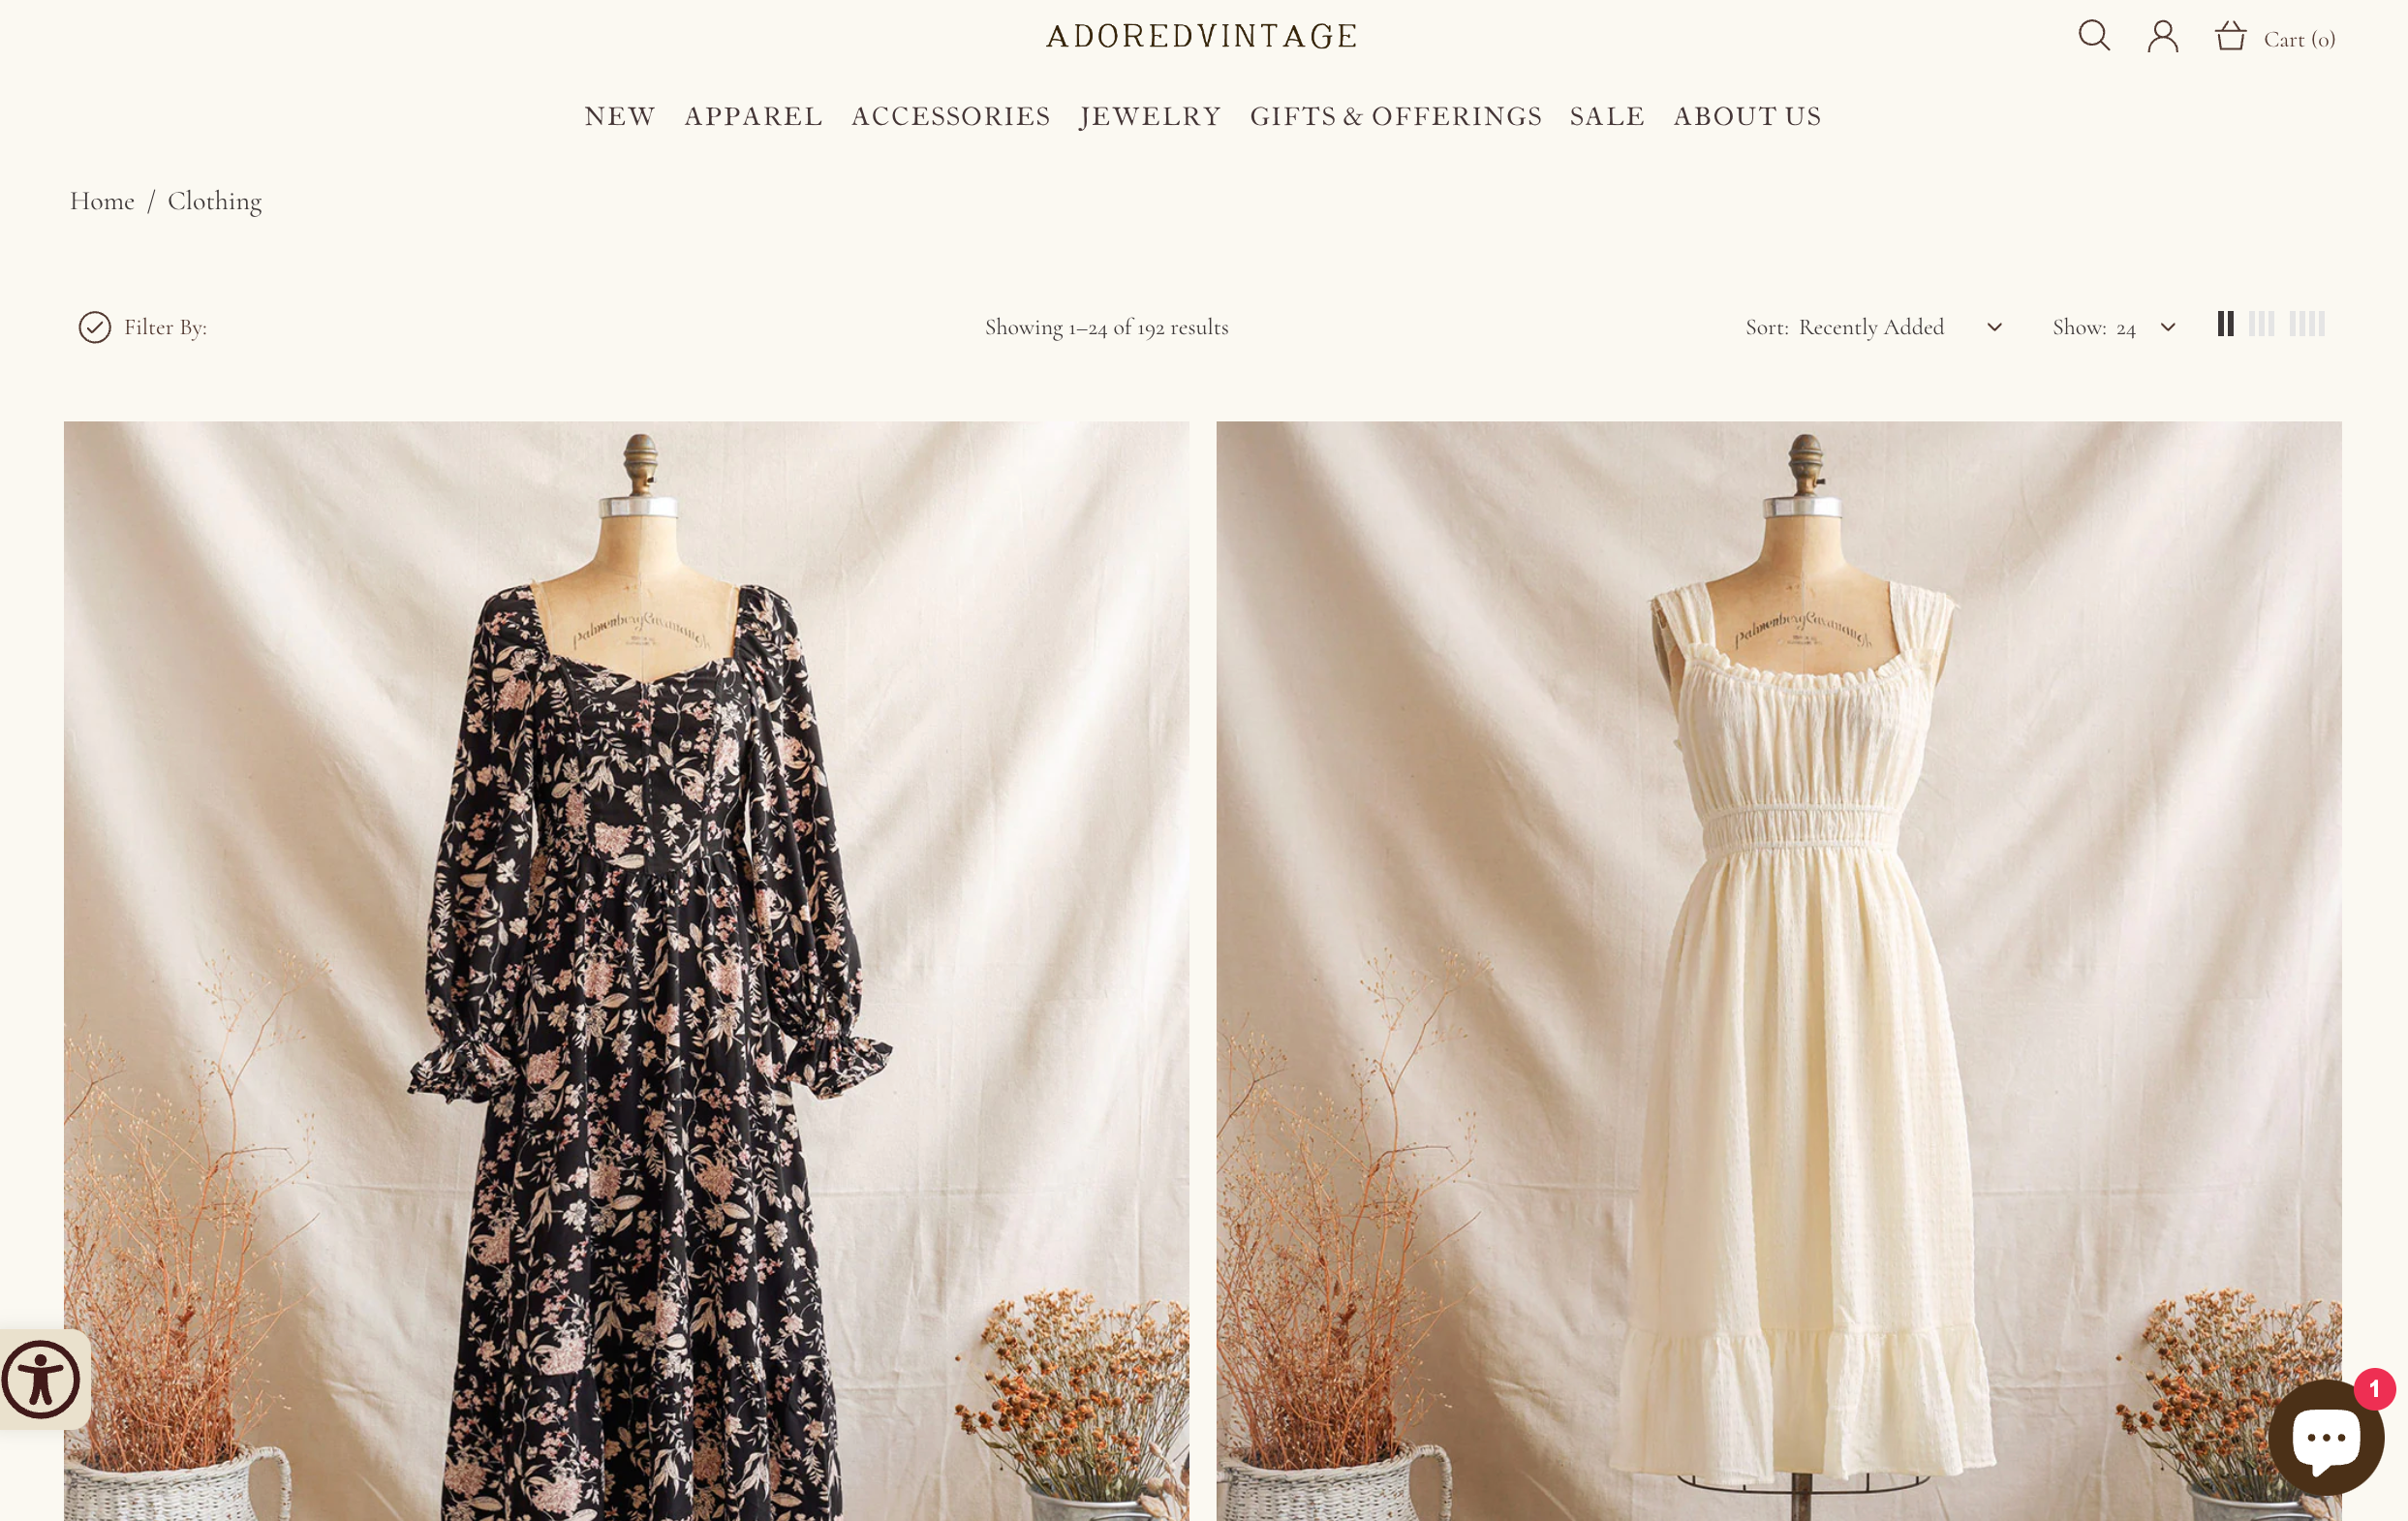 Home page for the ecommerce website of Shopify store Adored Vintage